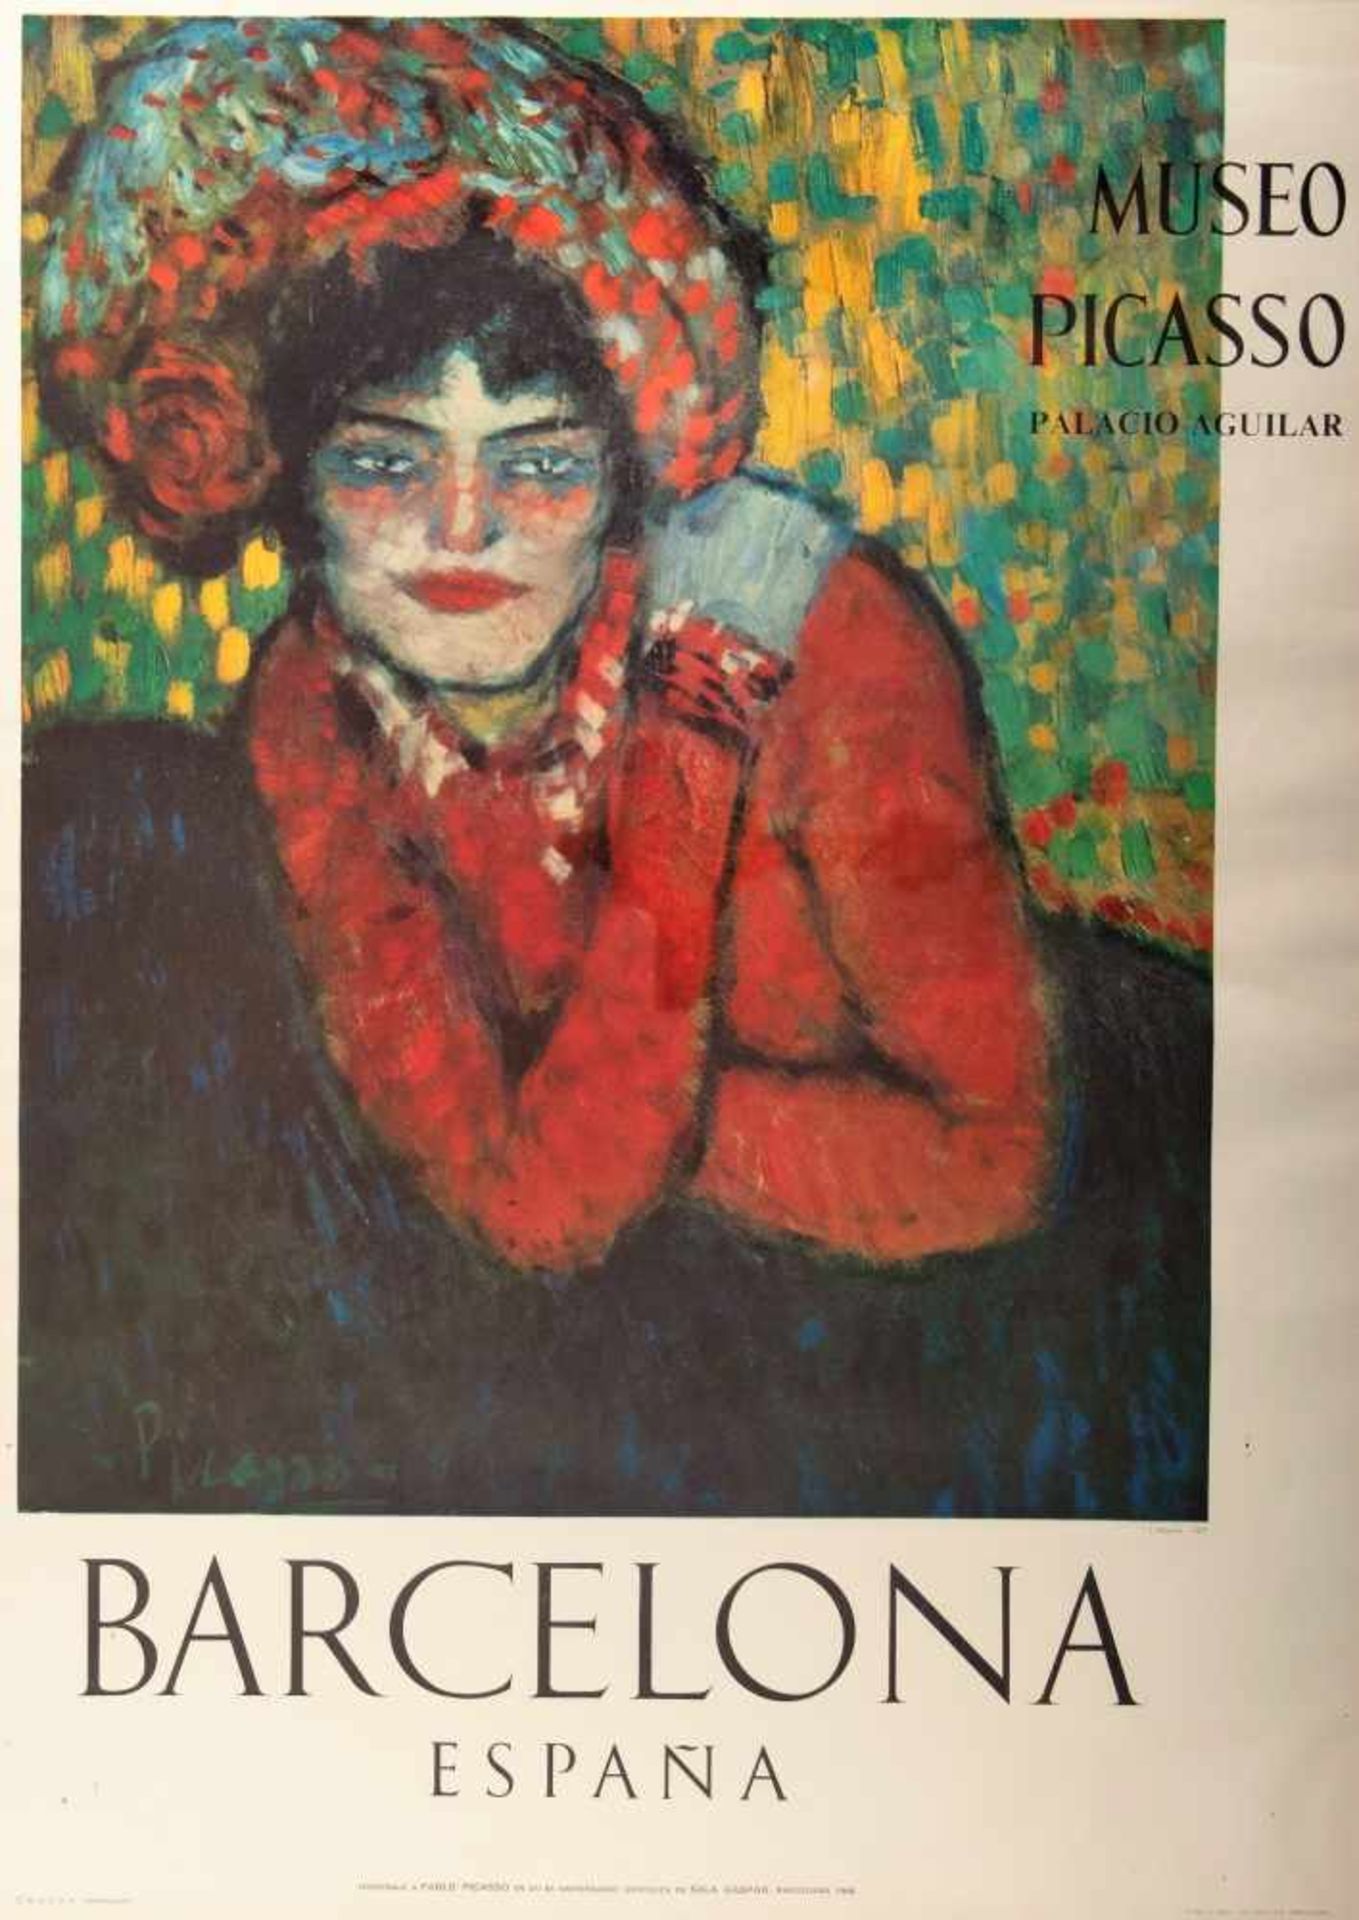 Historical vintage poster by Pablo Picasso